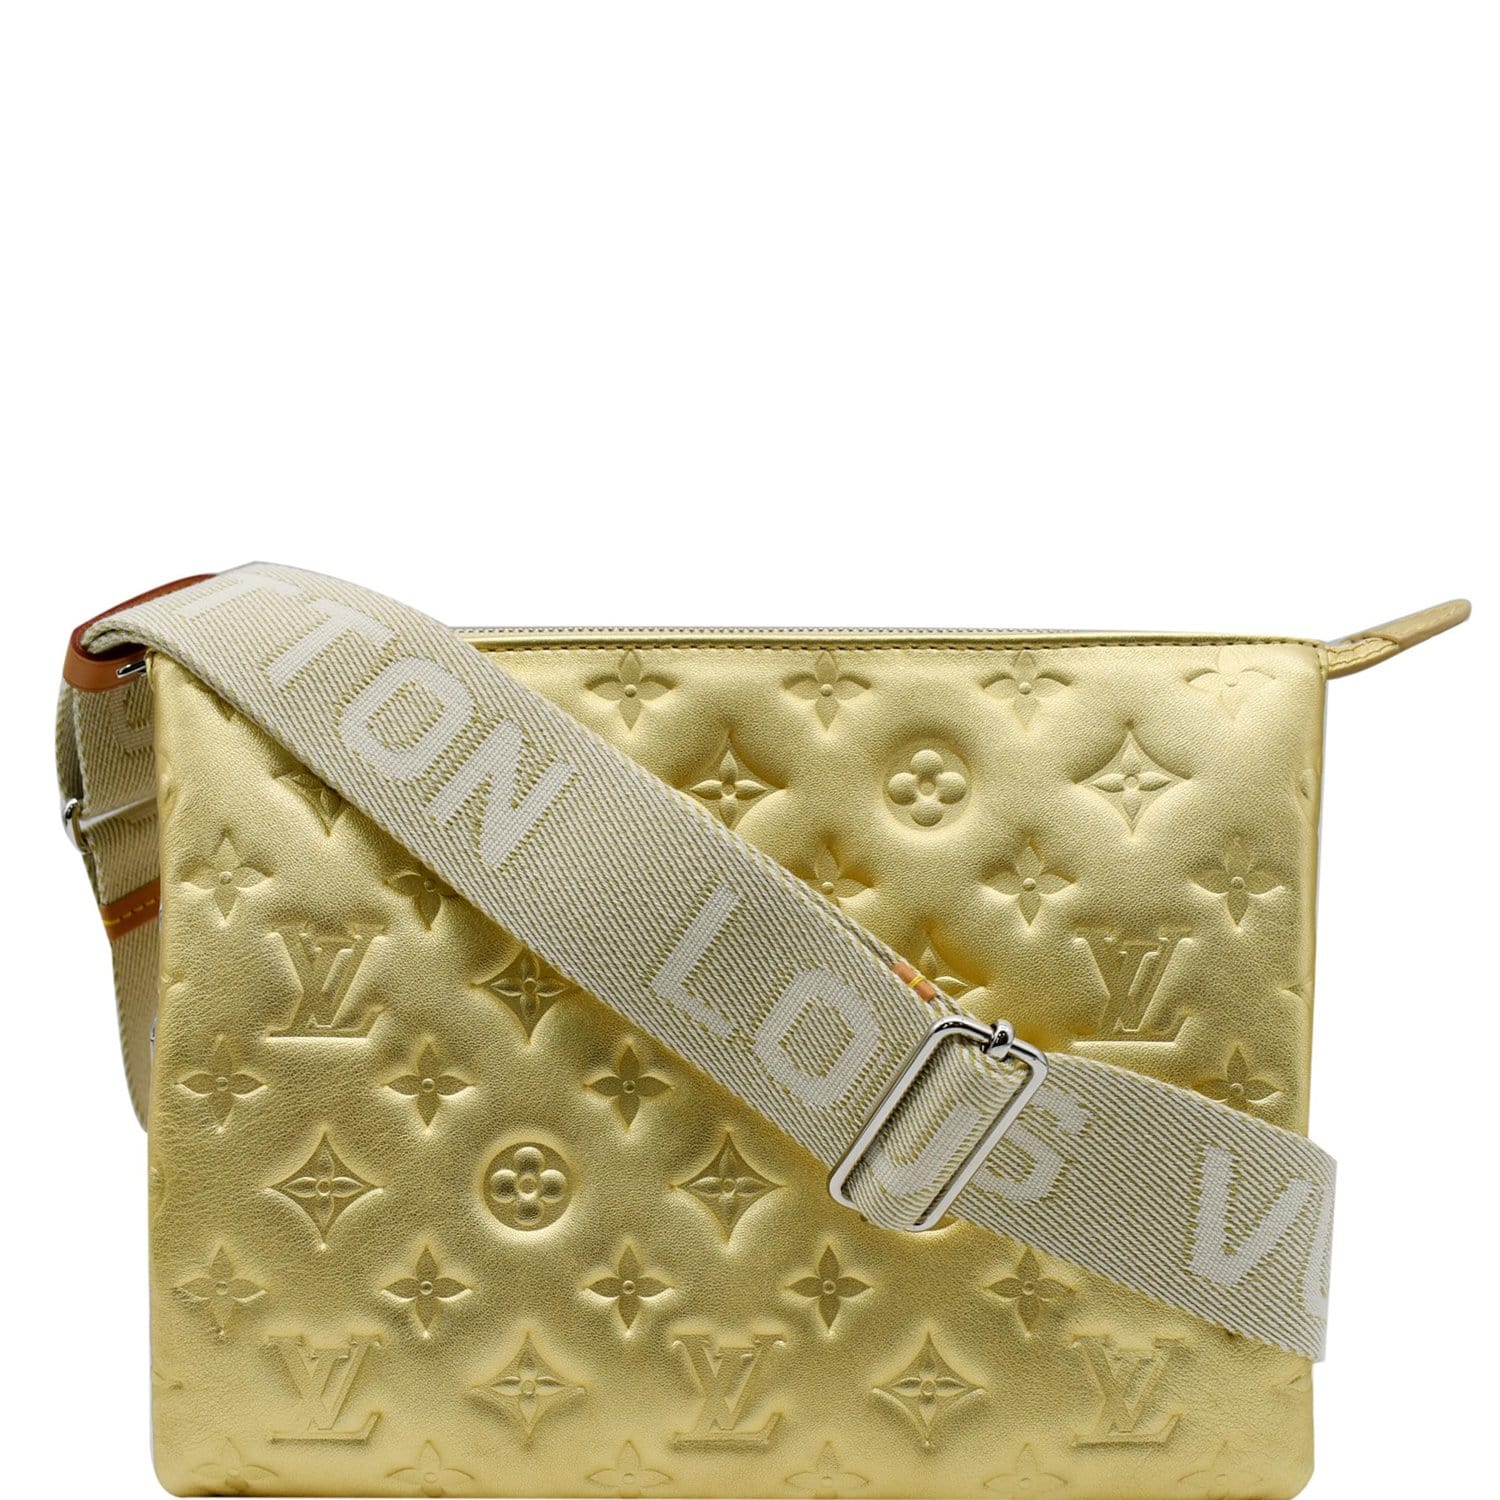 The Louis Vuitton Coussin Is the Newest Must-Have from the House